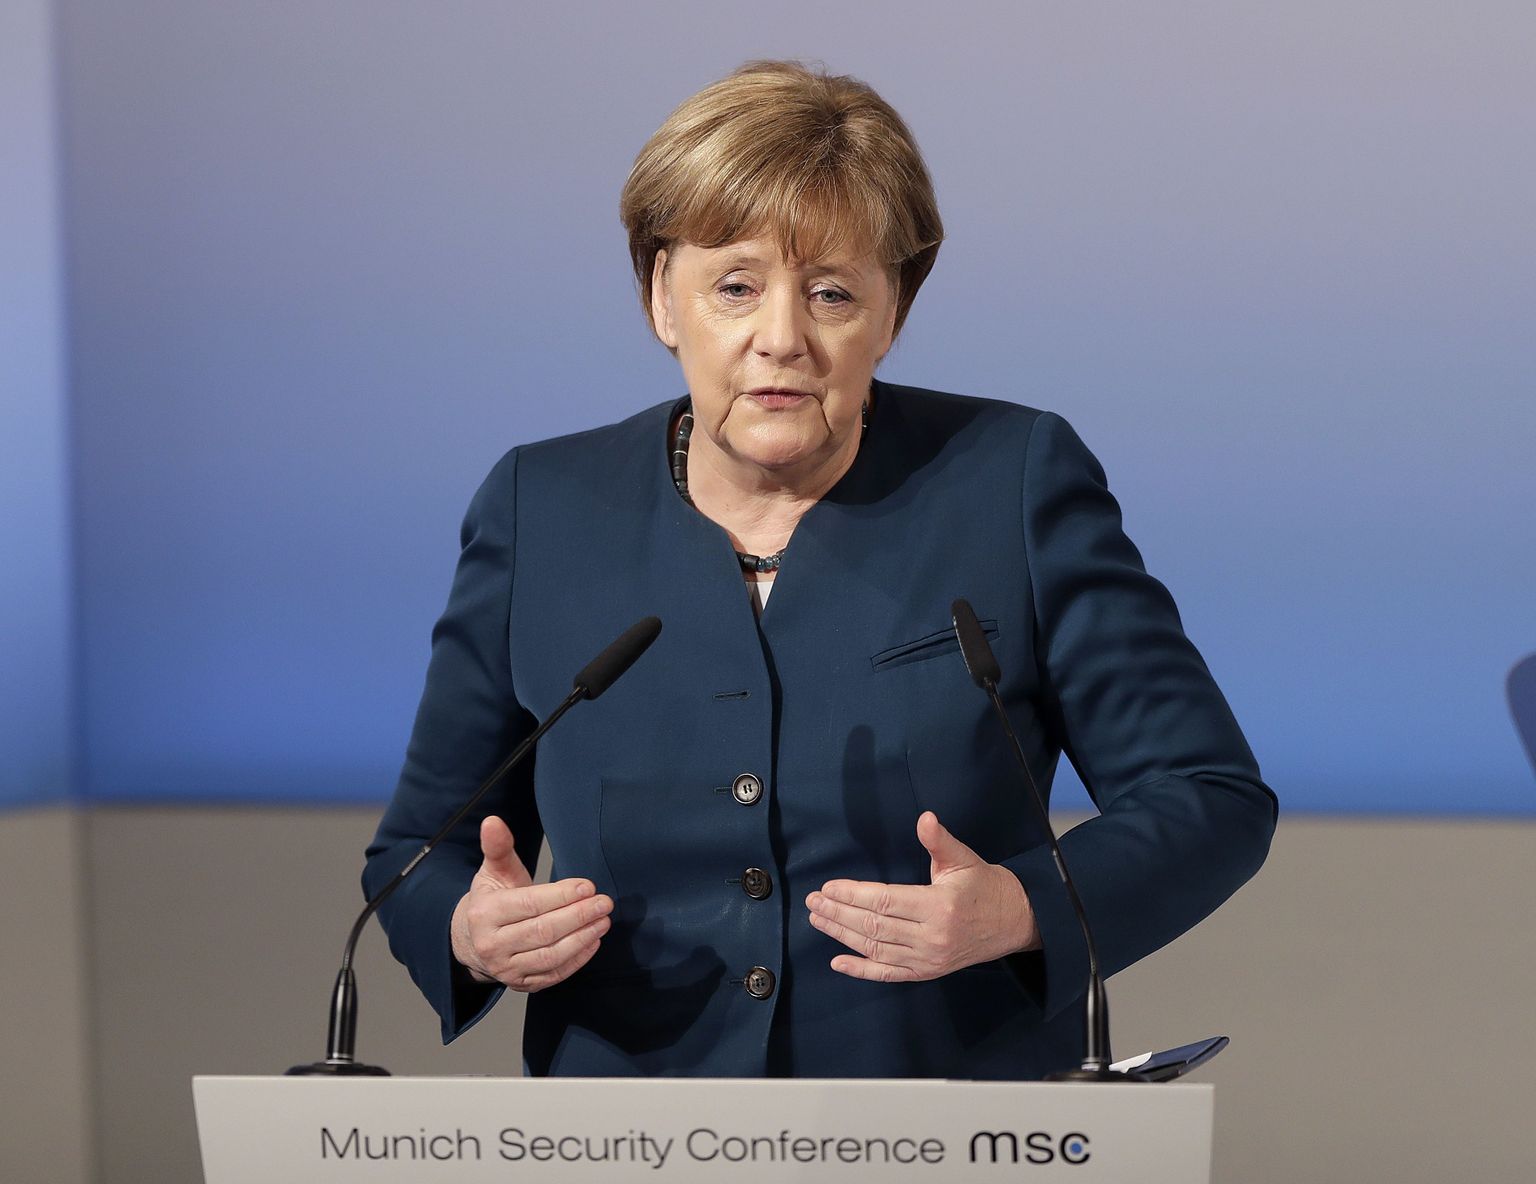 German Chancellor Angela Merkel speaks during the Munich Security Conference in Munich, Germany, Saturday, Feb. 18, 2017. The annual weekend gathering is known for providing an open and informal platform to meet in close quarters. (AP Photo/Matthias Schrader)